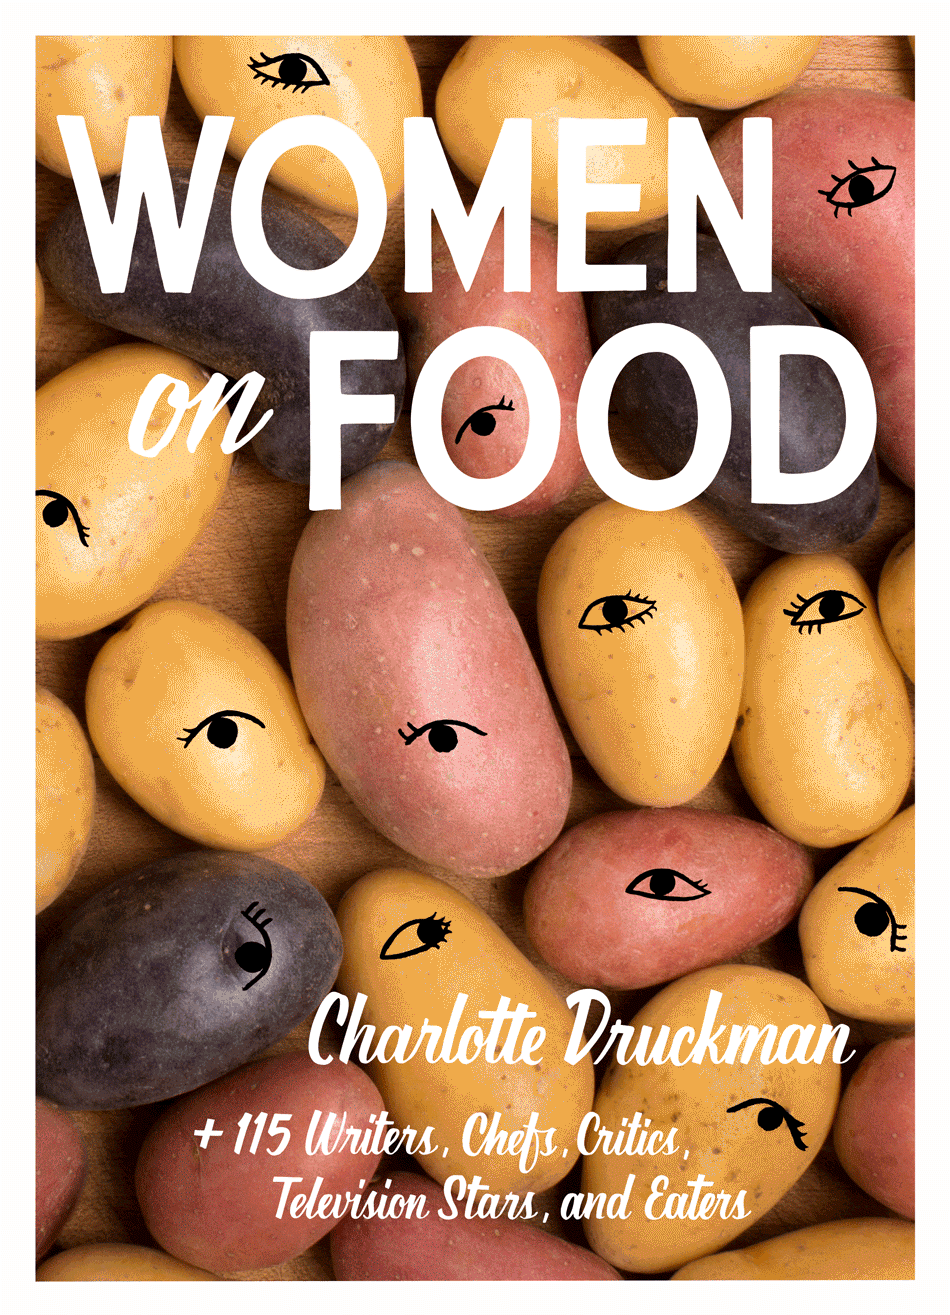  Women on Food is where you’d expect it to be: everywhere books are sold.  You can buy a copy  here   You can buy a copy  there *  The copies are available  everywhere    (*Don’t neglect your local booksellers!) 